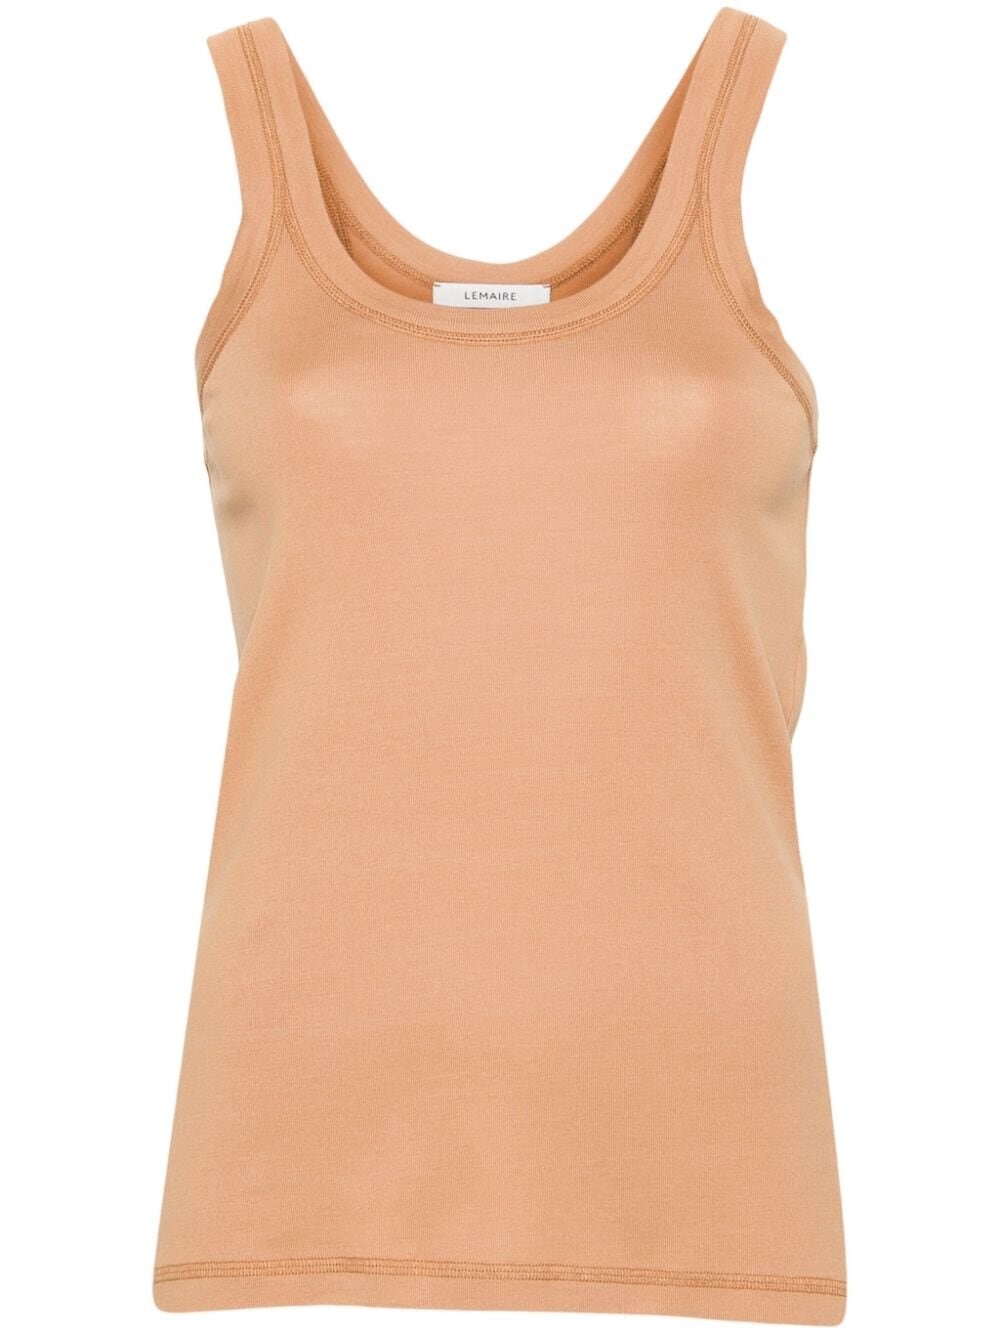 Lemaire Rib Tank Top In Brown